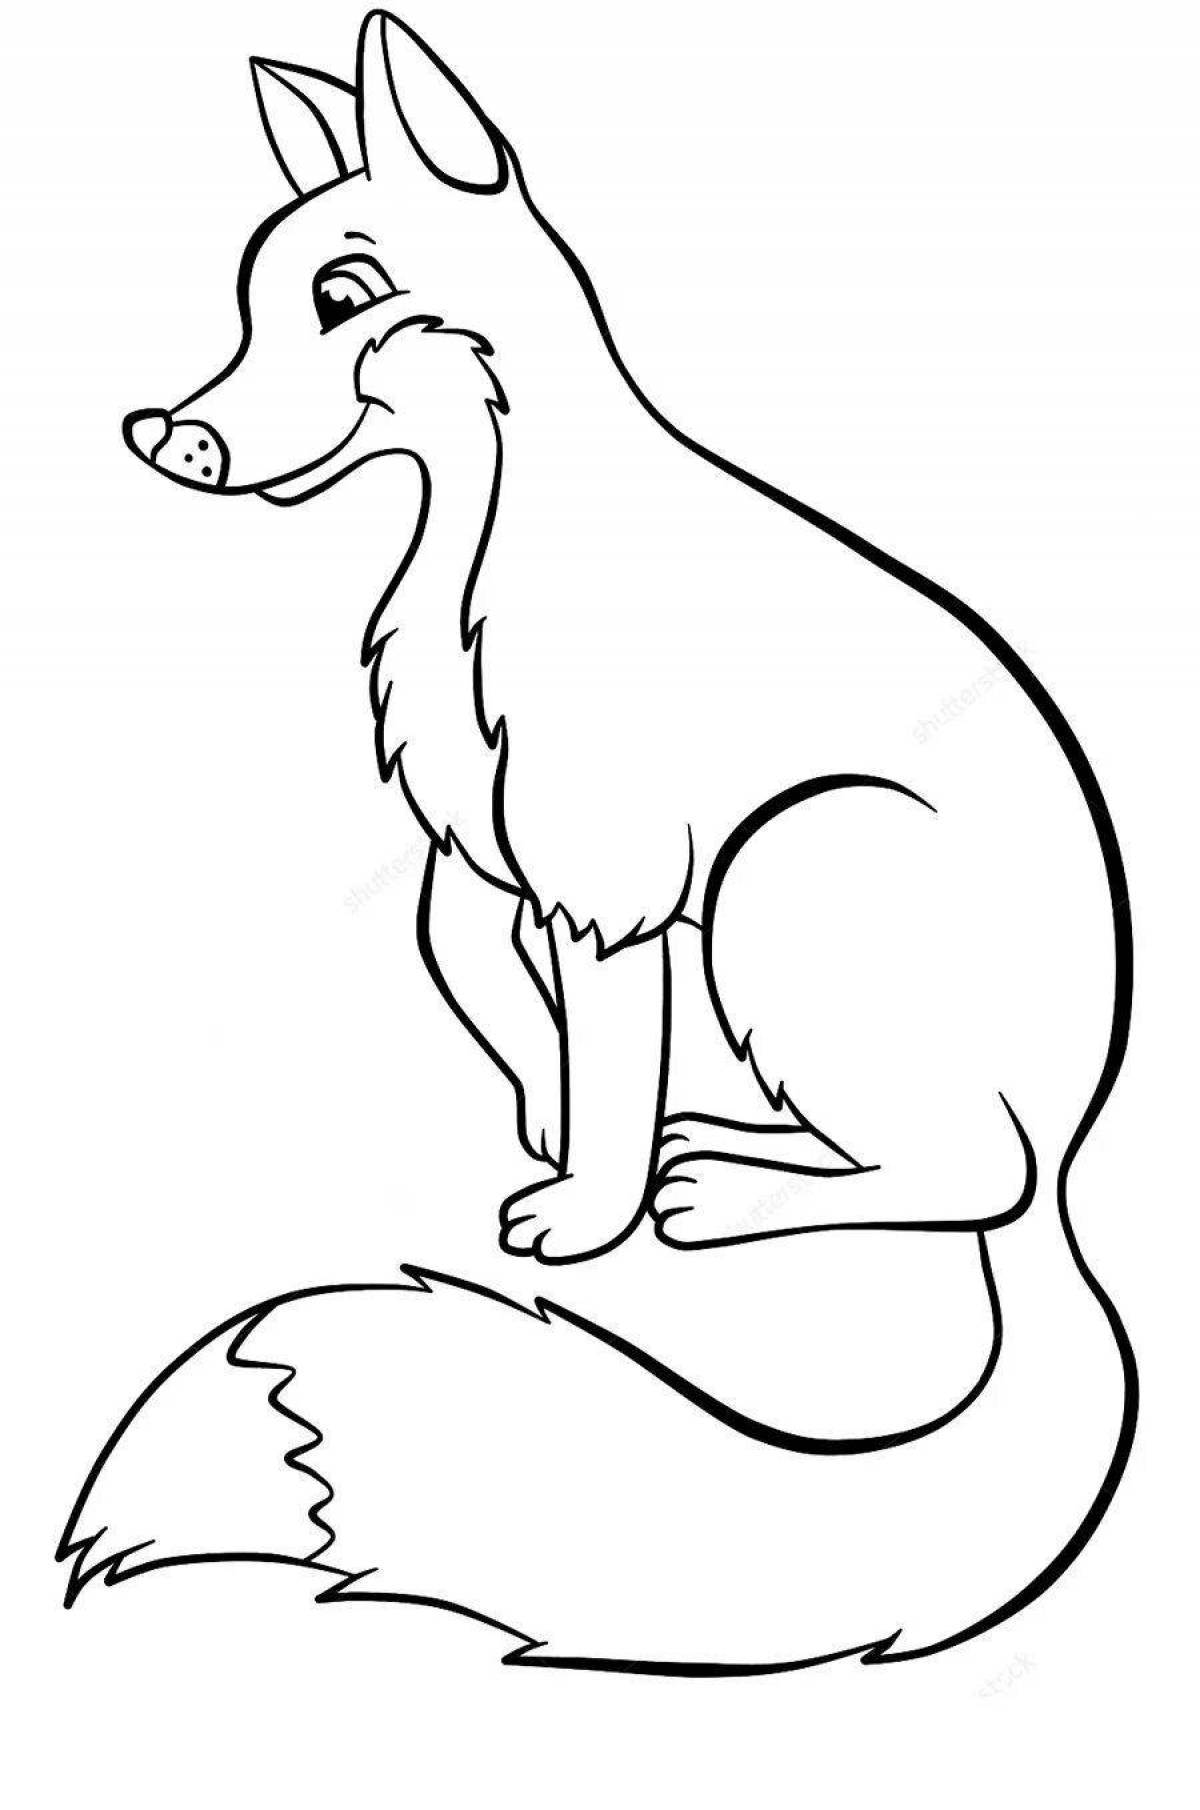 Coloring book cheerful sitting fox